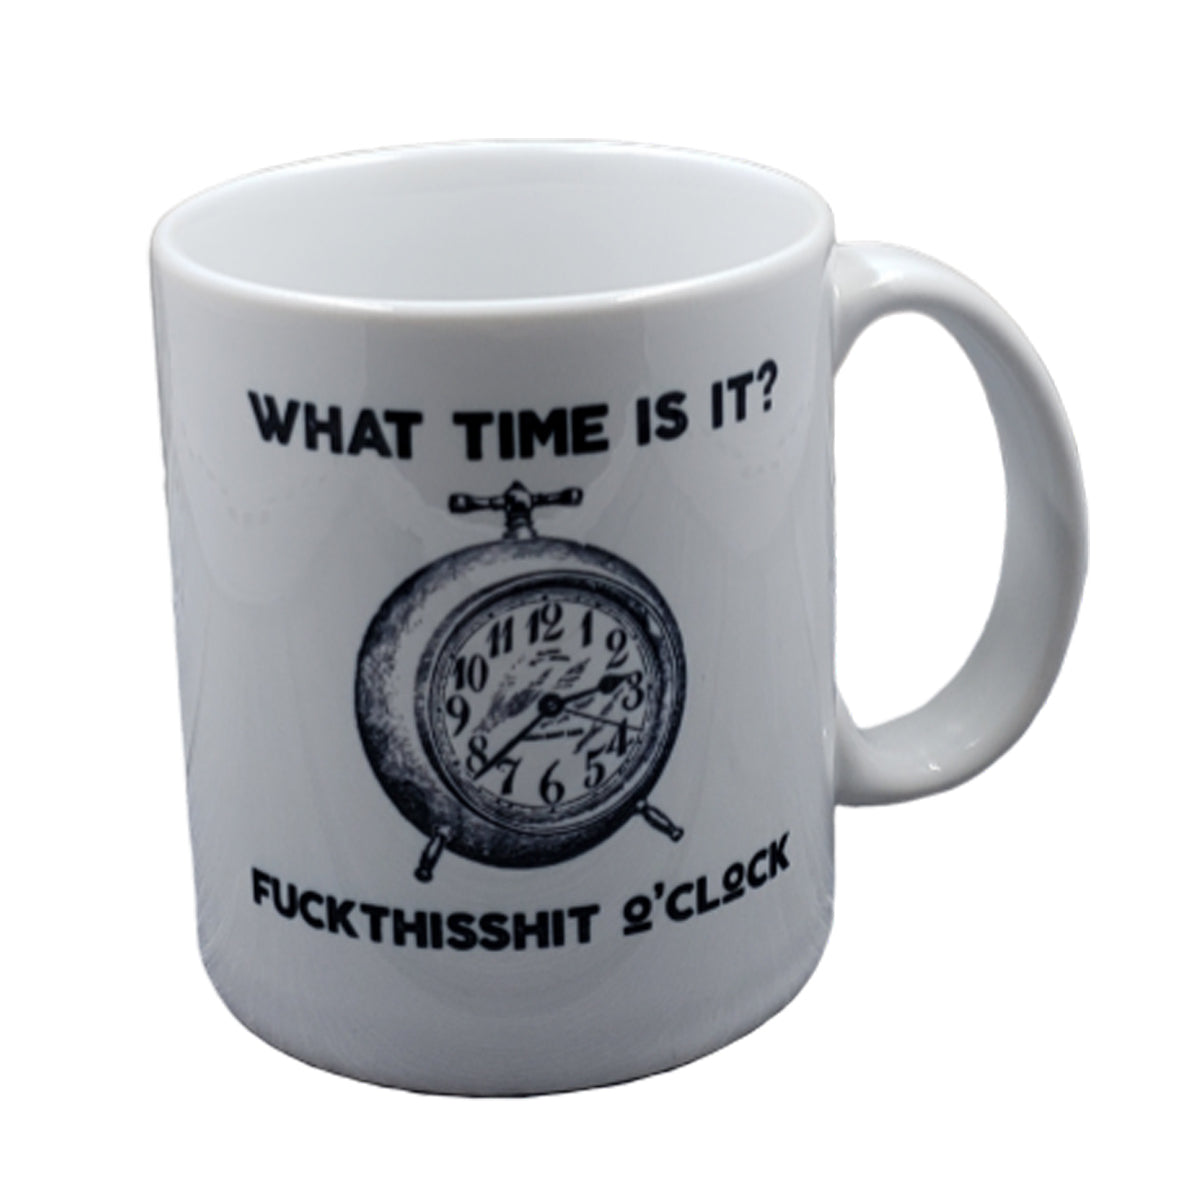 What time is it? Mug NASFW